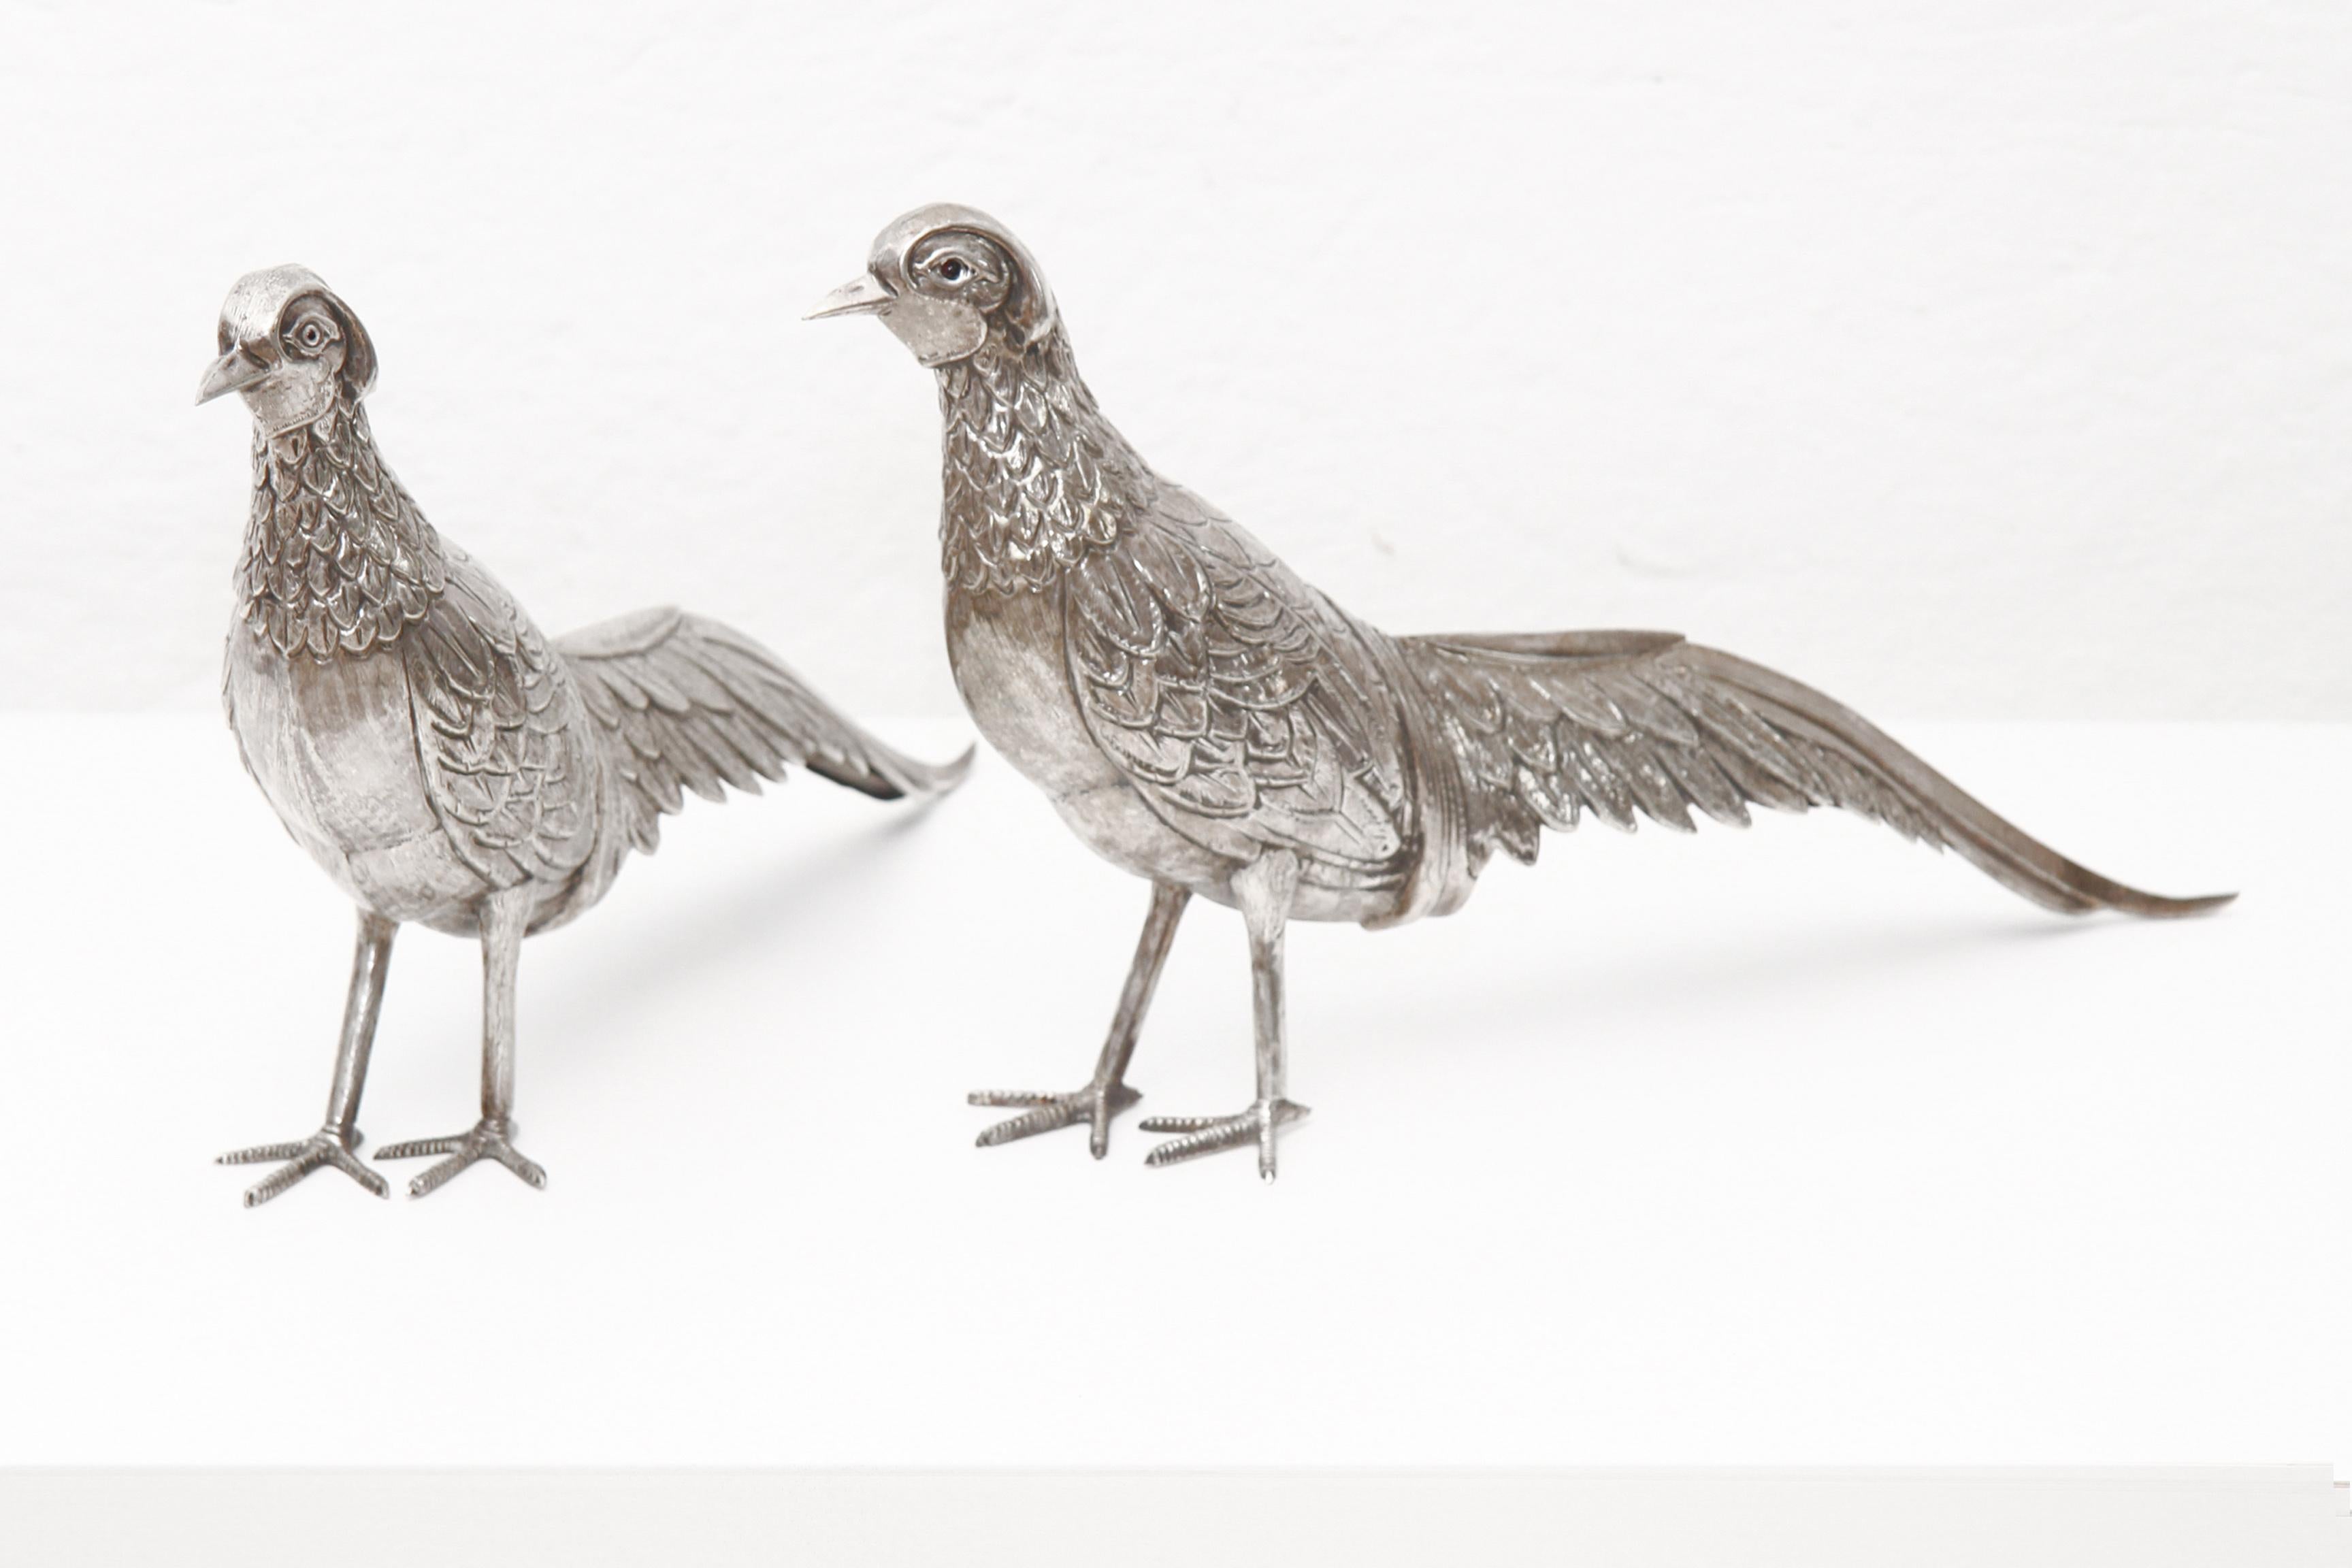 Hand-Crafted Fine Art Nouveau Silver Pheasants from Austria, Vienna Driven by Hand, Chased